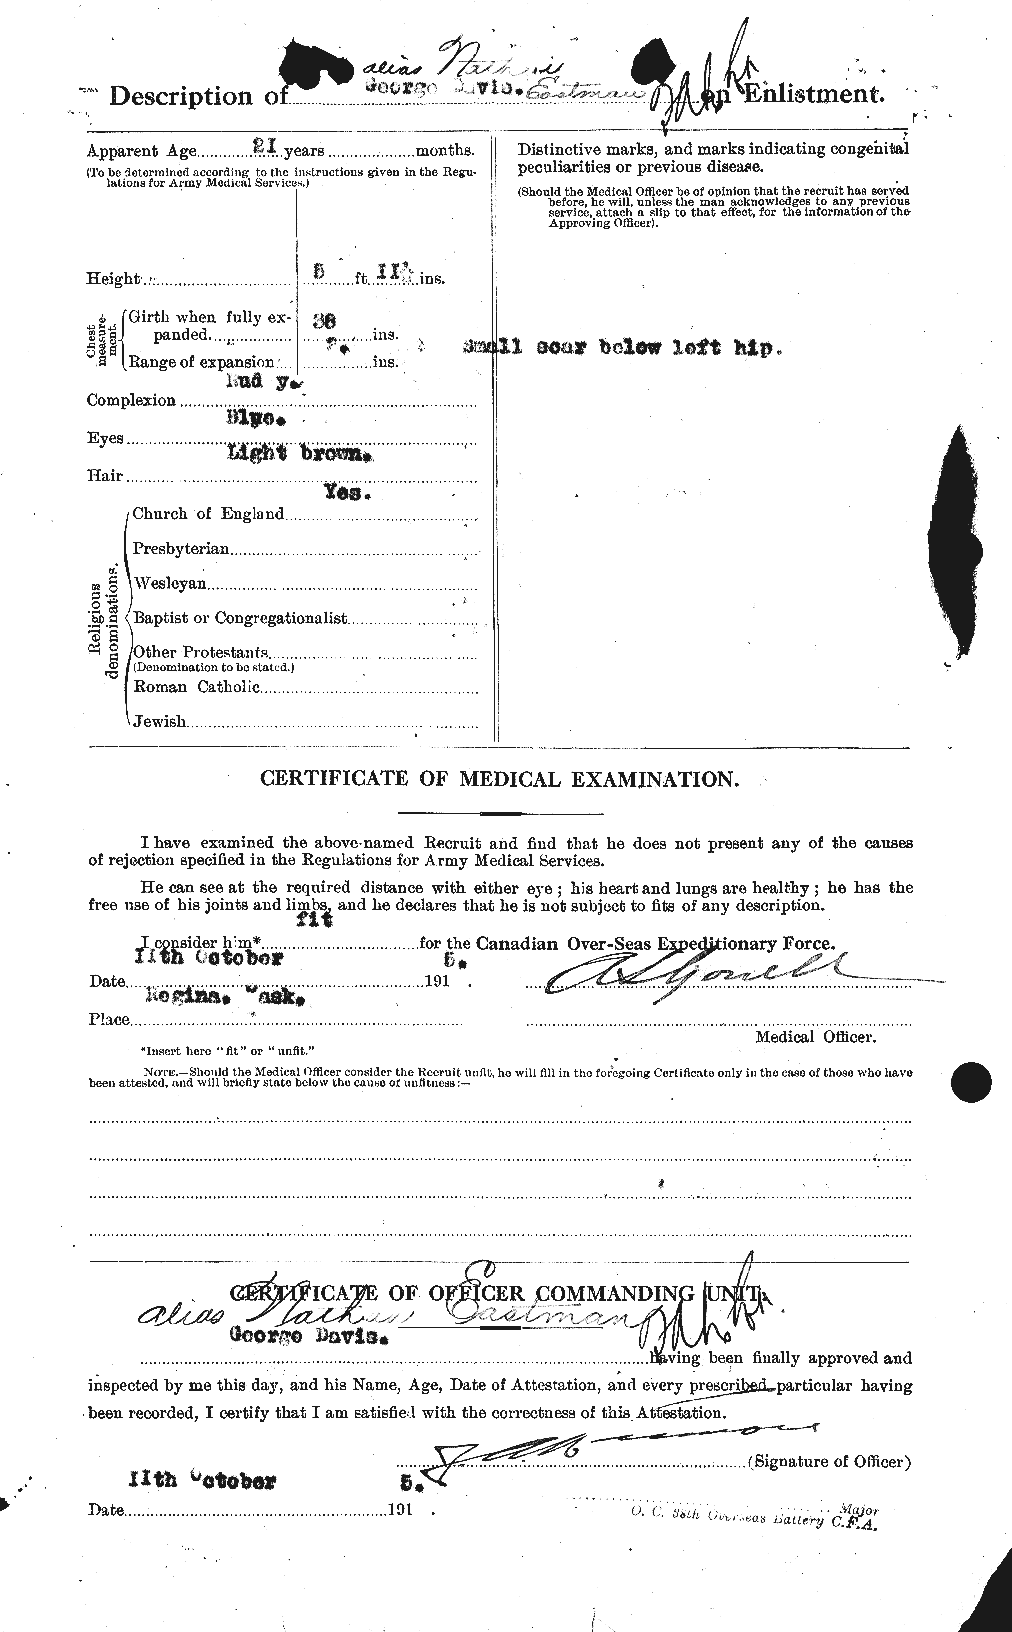 Personnel Records of the First World War - CEF 307438b